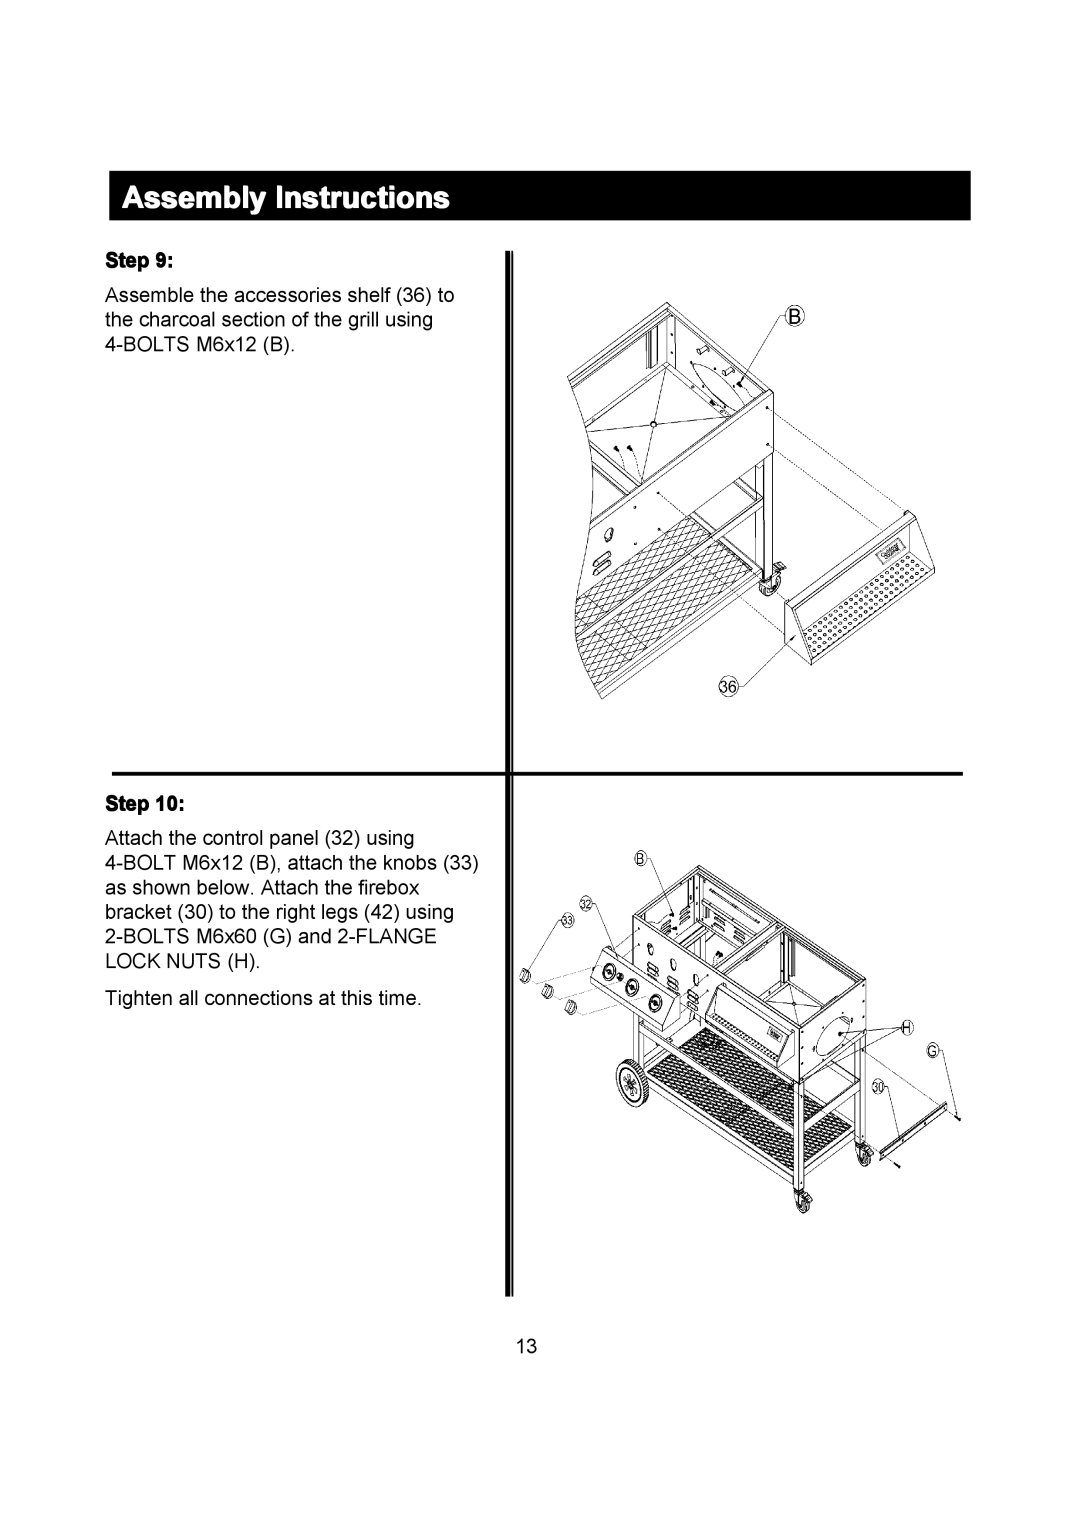 Outdoor Gourmet CG3023E instruction manual Assembly Instructions, Step, Attach the control panel 32 using 